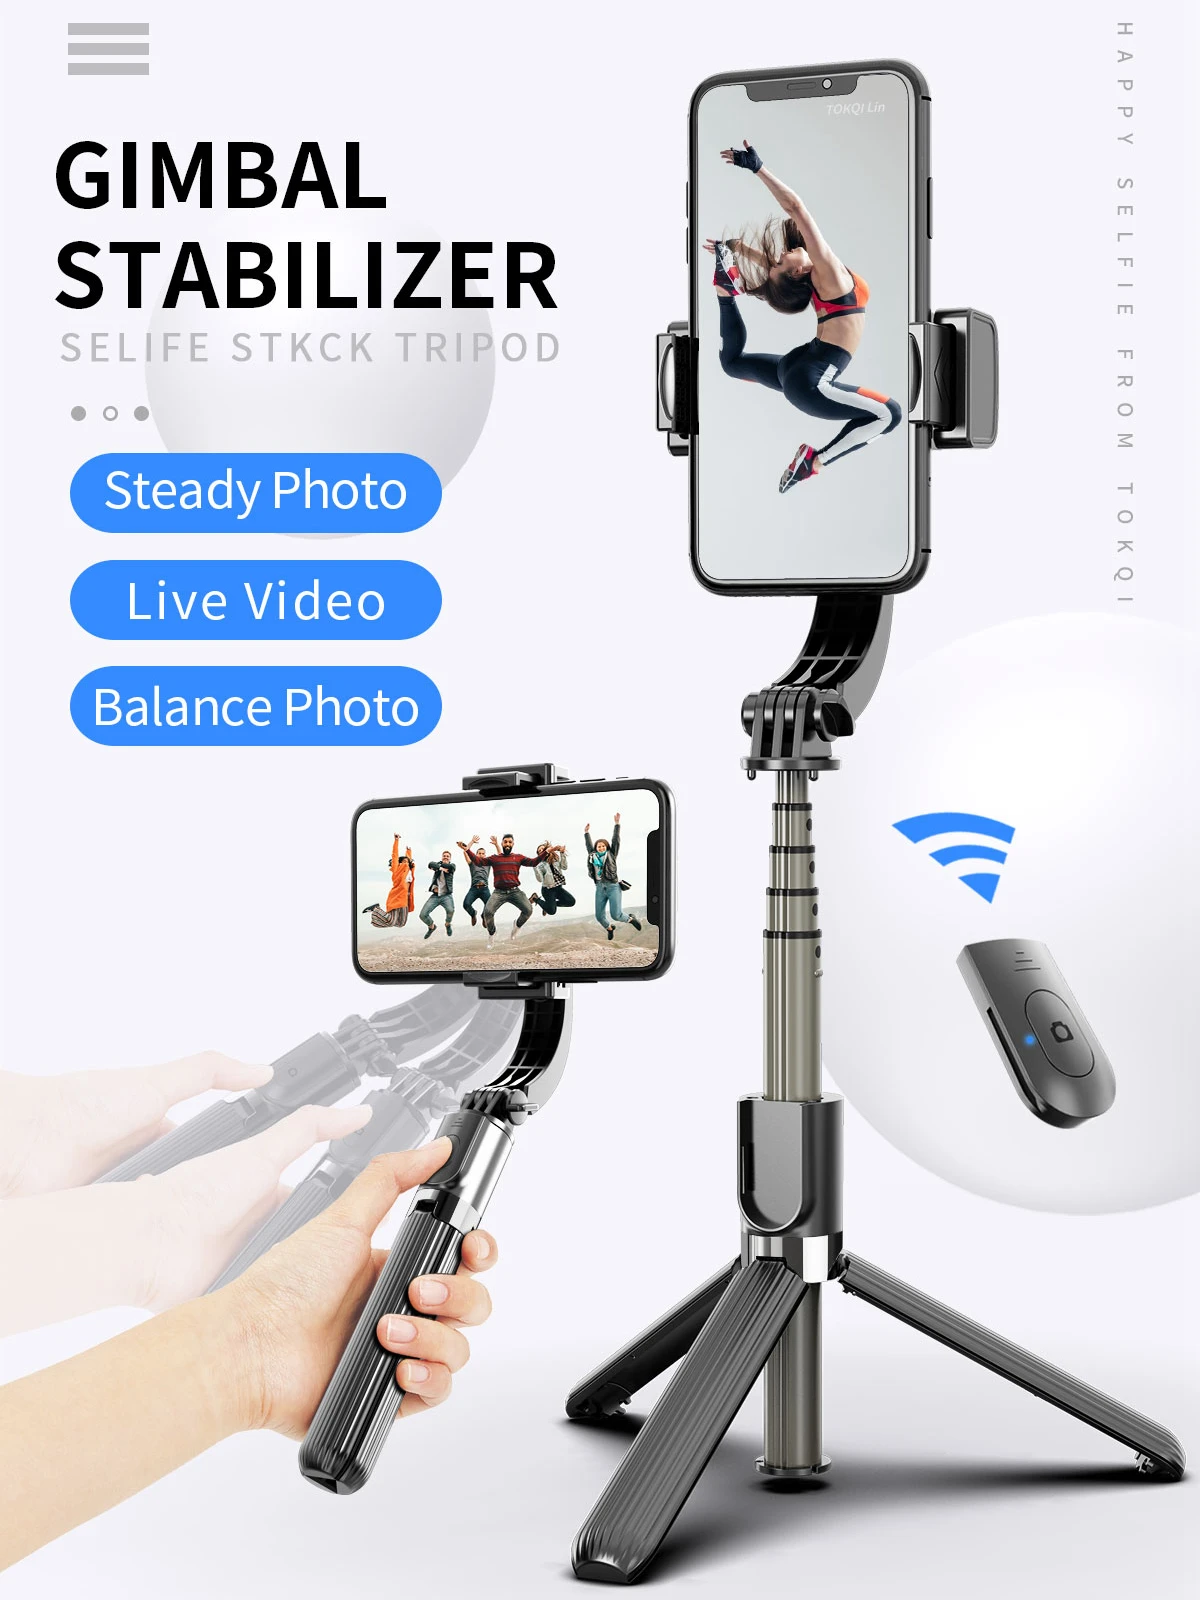 

NAGNAHZ One Axis Handheld Gimbal Stabilizer With Bluetooth shutter Tripod For Smartphone Action camera Video Record Vlog Live